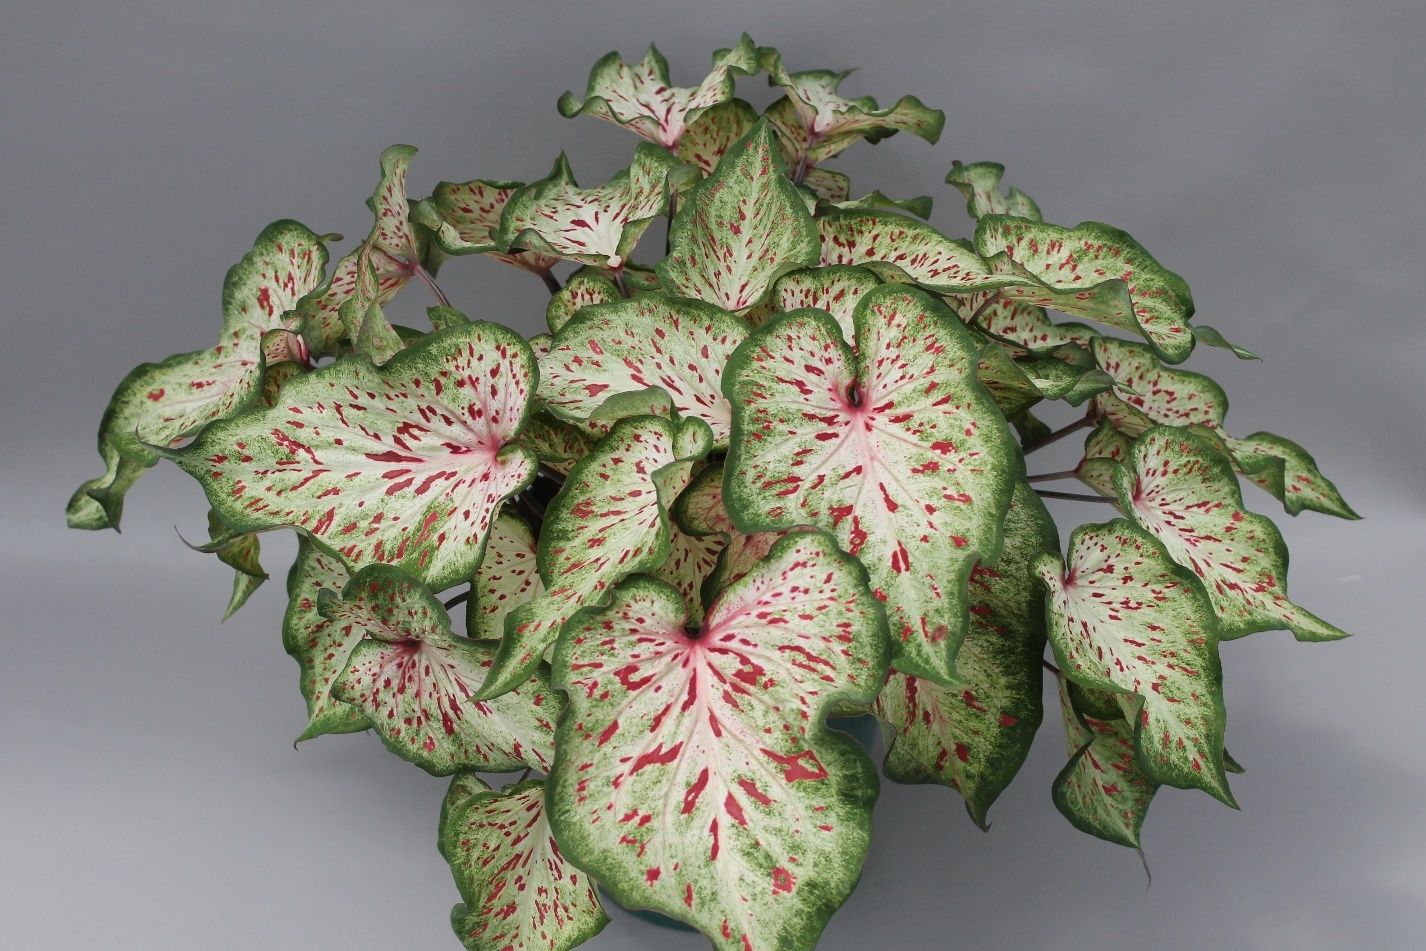 A typical plant of ‘Wonderland’ caladium (approximately 45 days old) forced from four No. 1 tubers in an 8-inch container. Tubers were planted on May 14, 2020, the plant was grown in a greenhouse with approximately 30% light exclusion, and the photo was taken on June 28, 2020. 